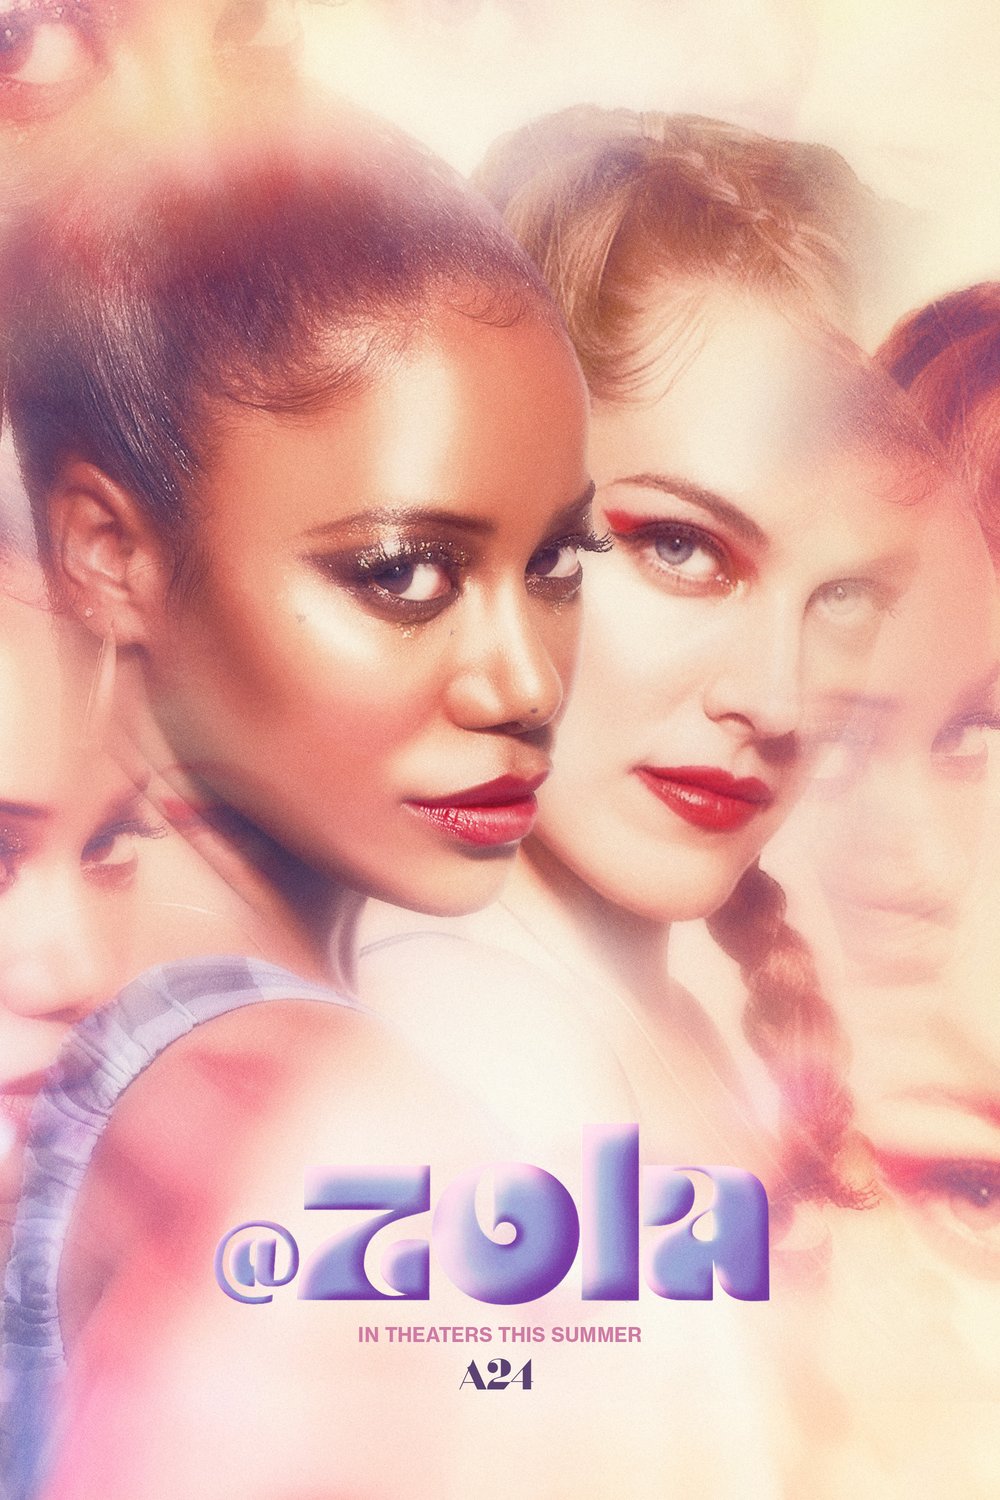 Poster of the movie Zola